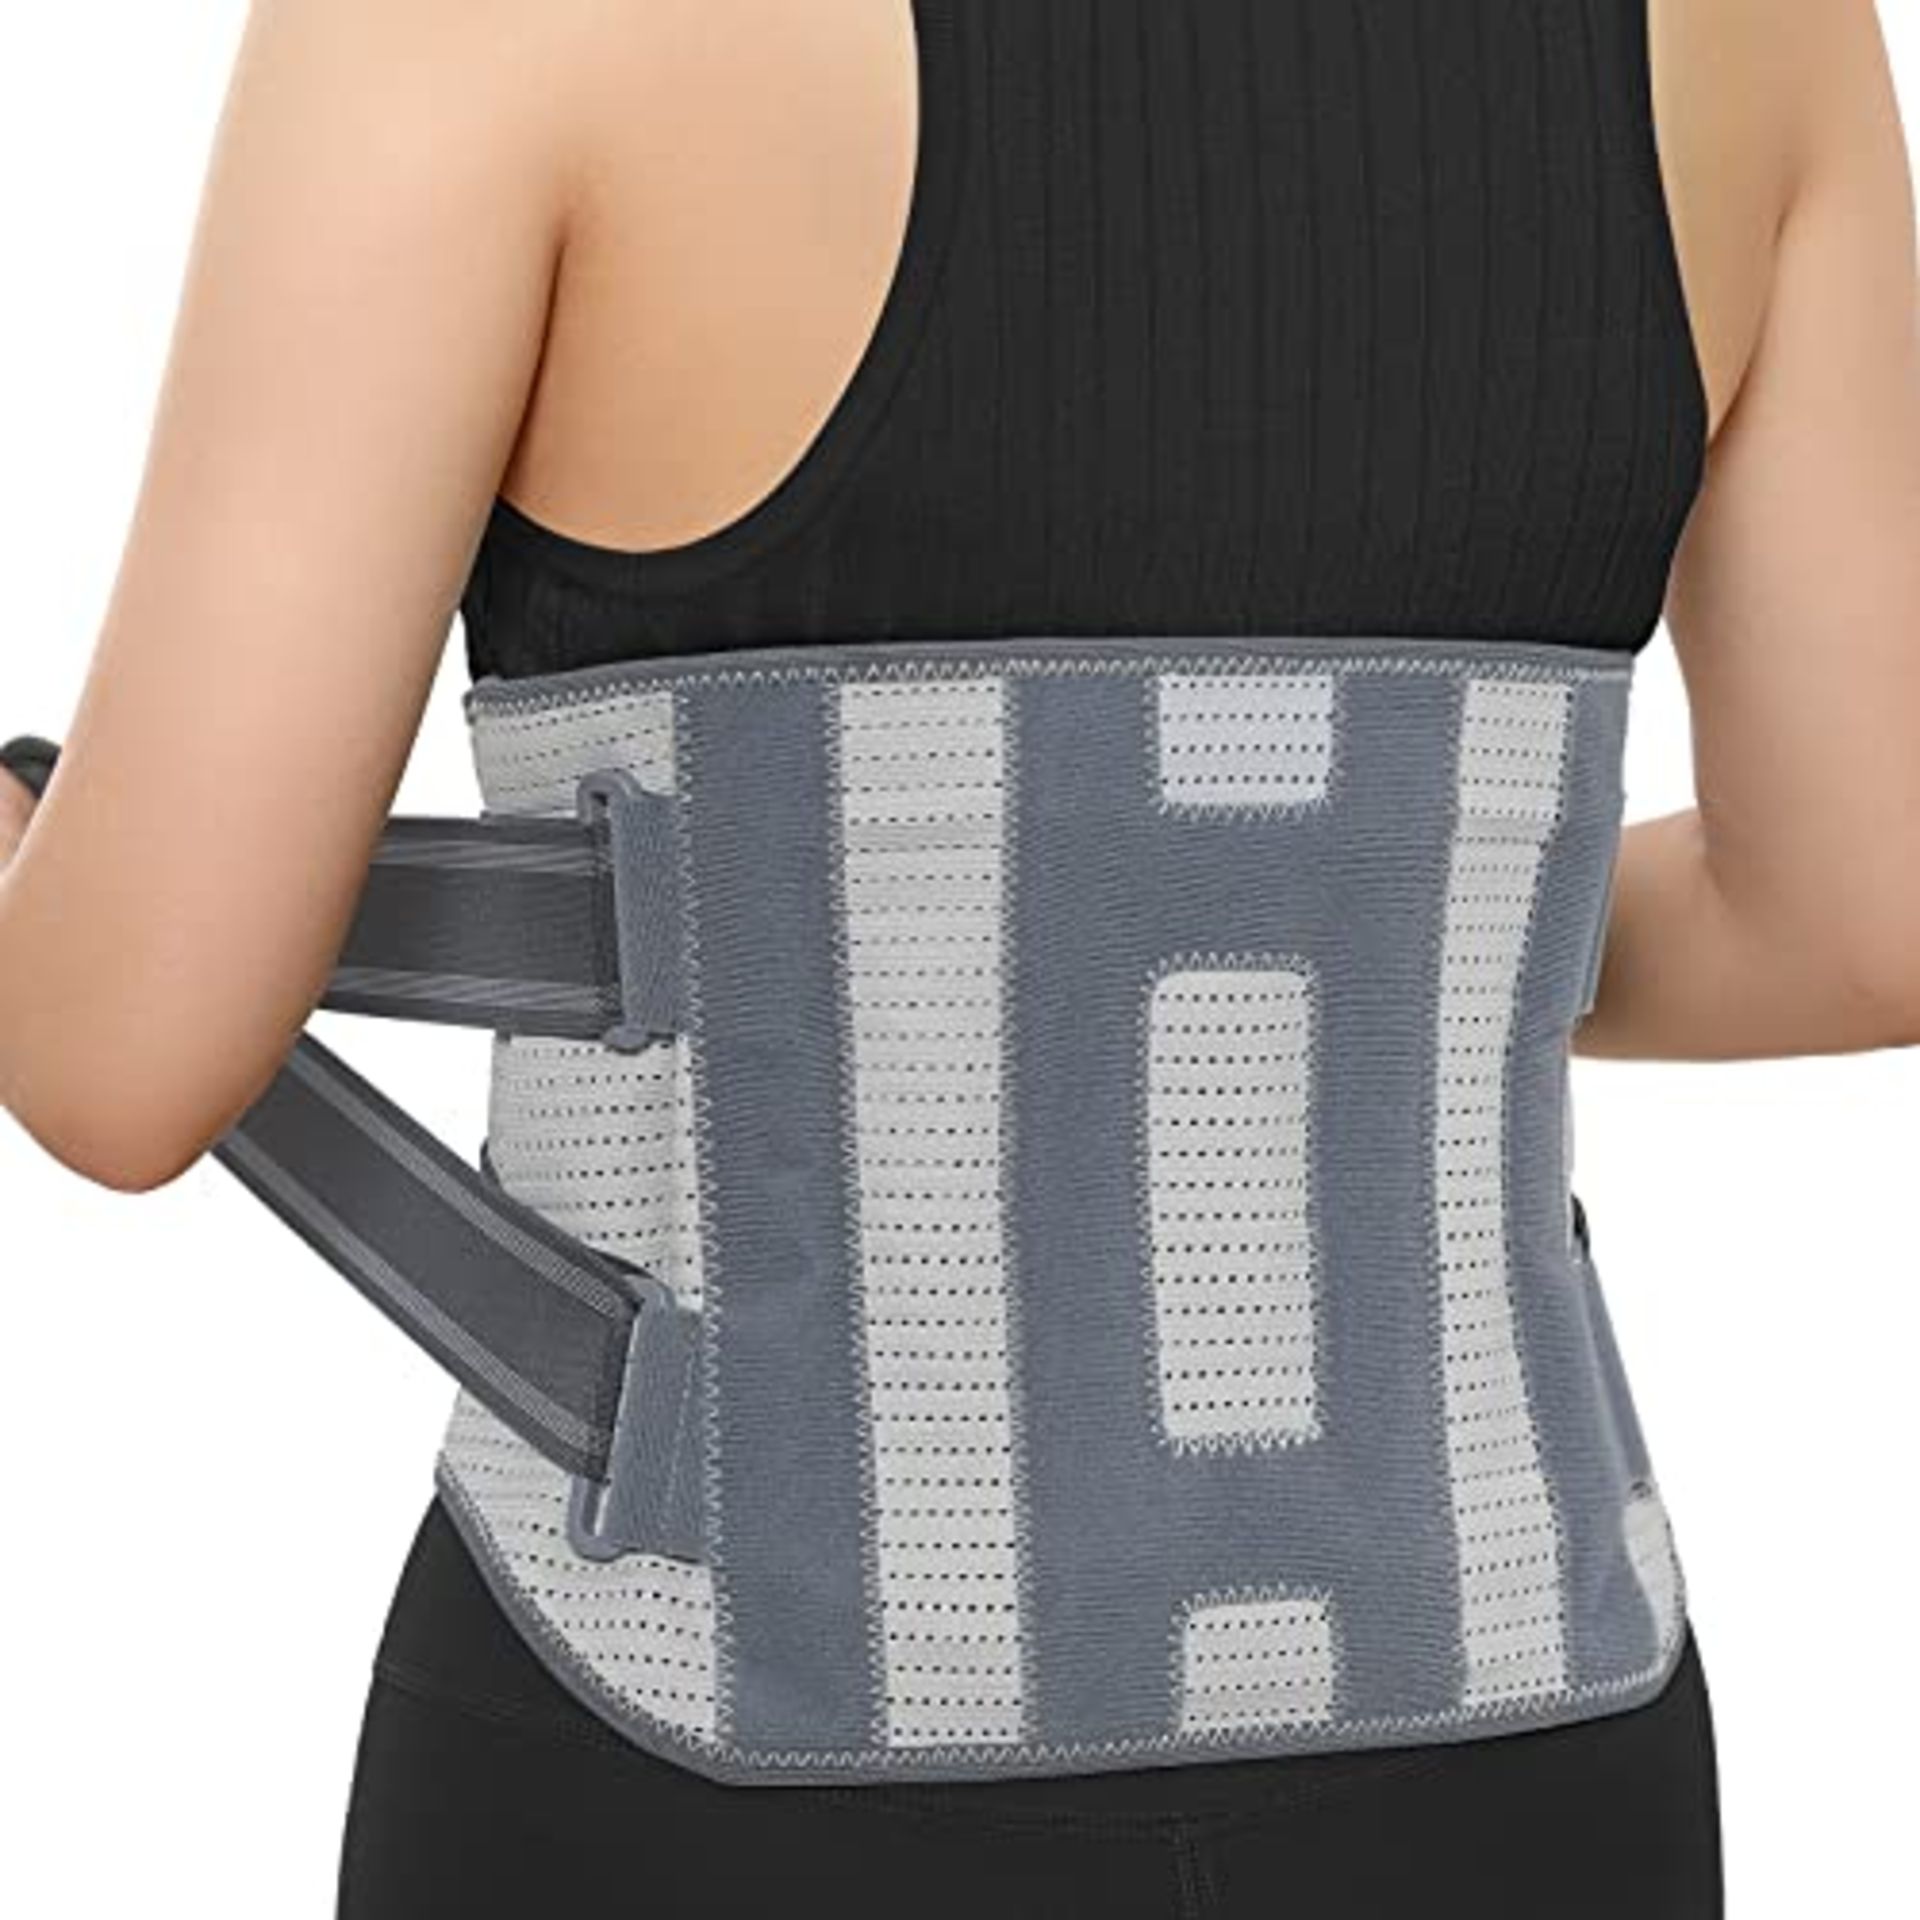 ABYON Back Support Belt for Men and Women, Air Mesh Adjustable and Breathable Lower Ba - Image 7 of 8